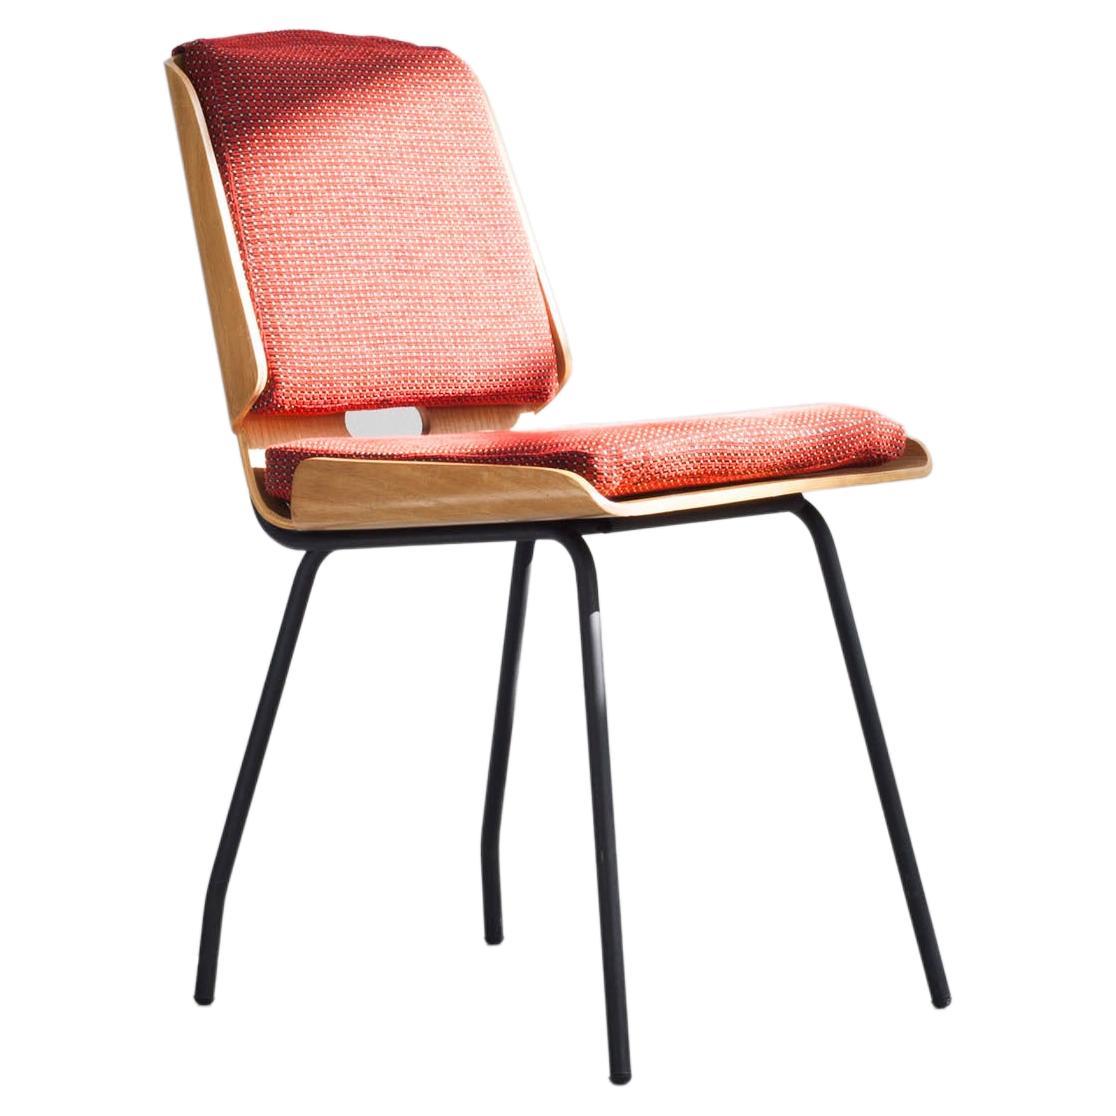 Chair Designed by Giancarlo De Carlo, Manufactured by Arflex, Italy, 1954 For Sale